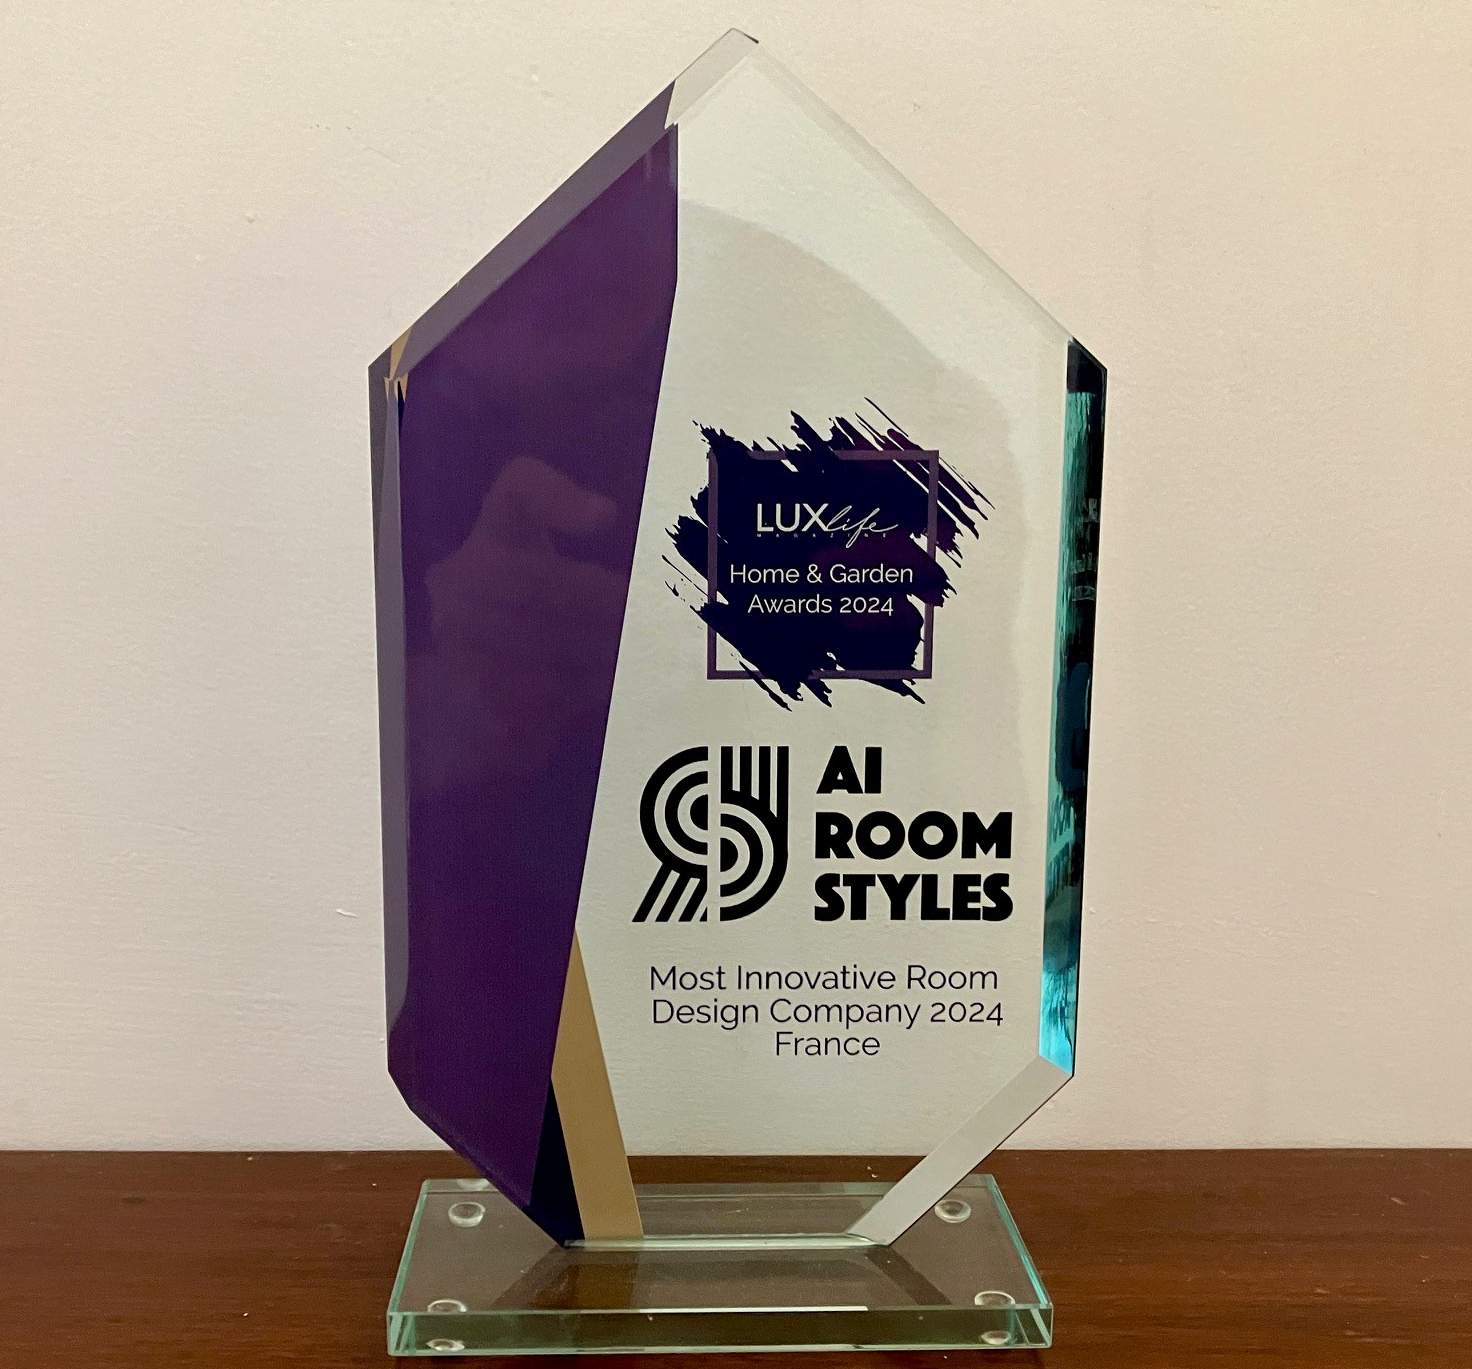 AI Room Style's Home & Garden Trophy from LUXLife